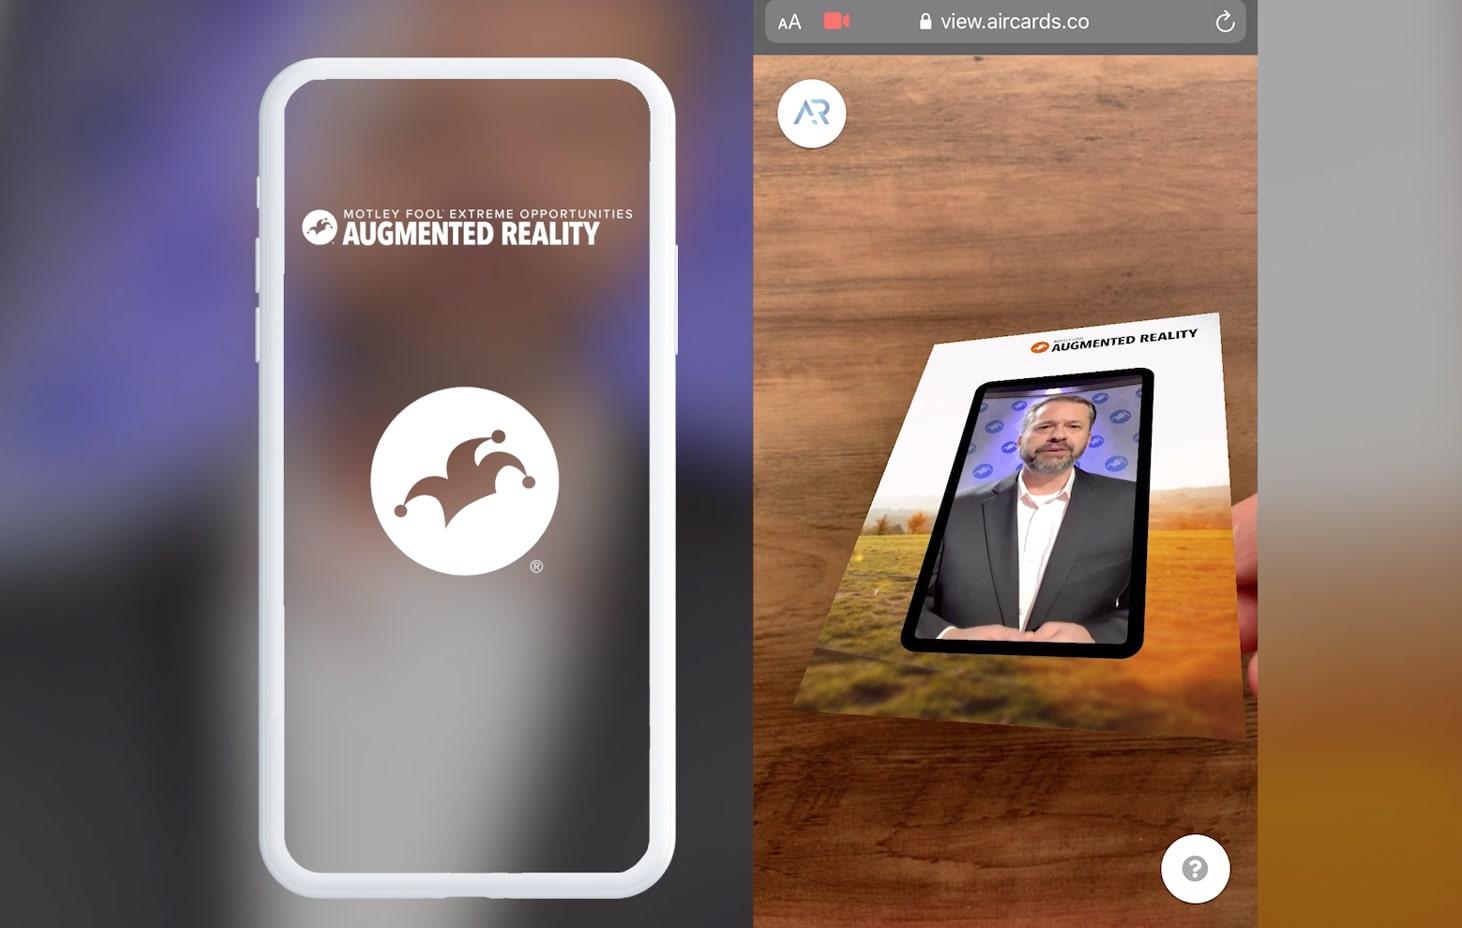 motley fool direct mail campaign using augmented reality